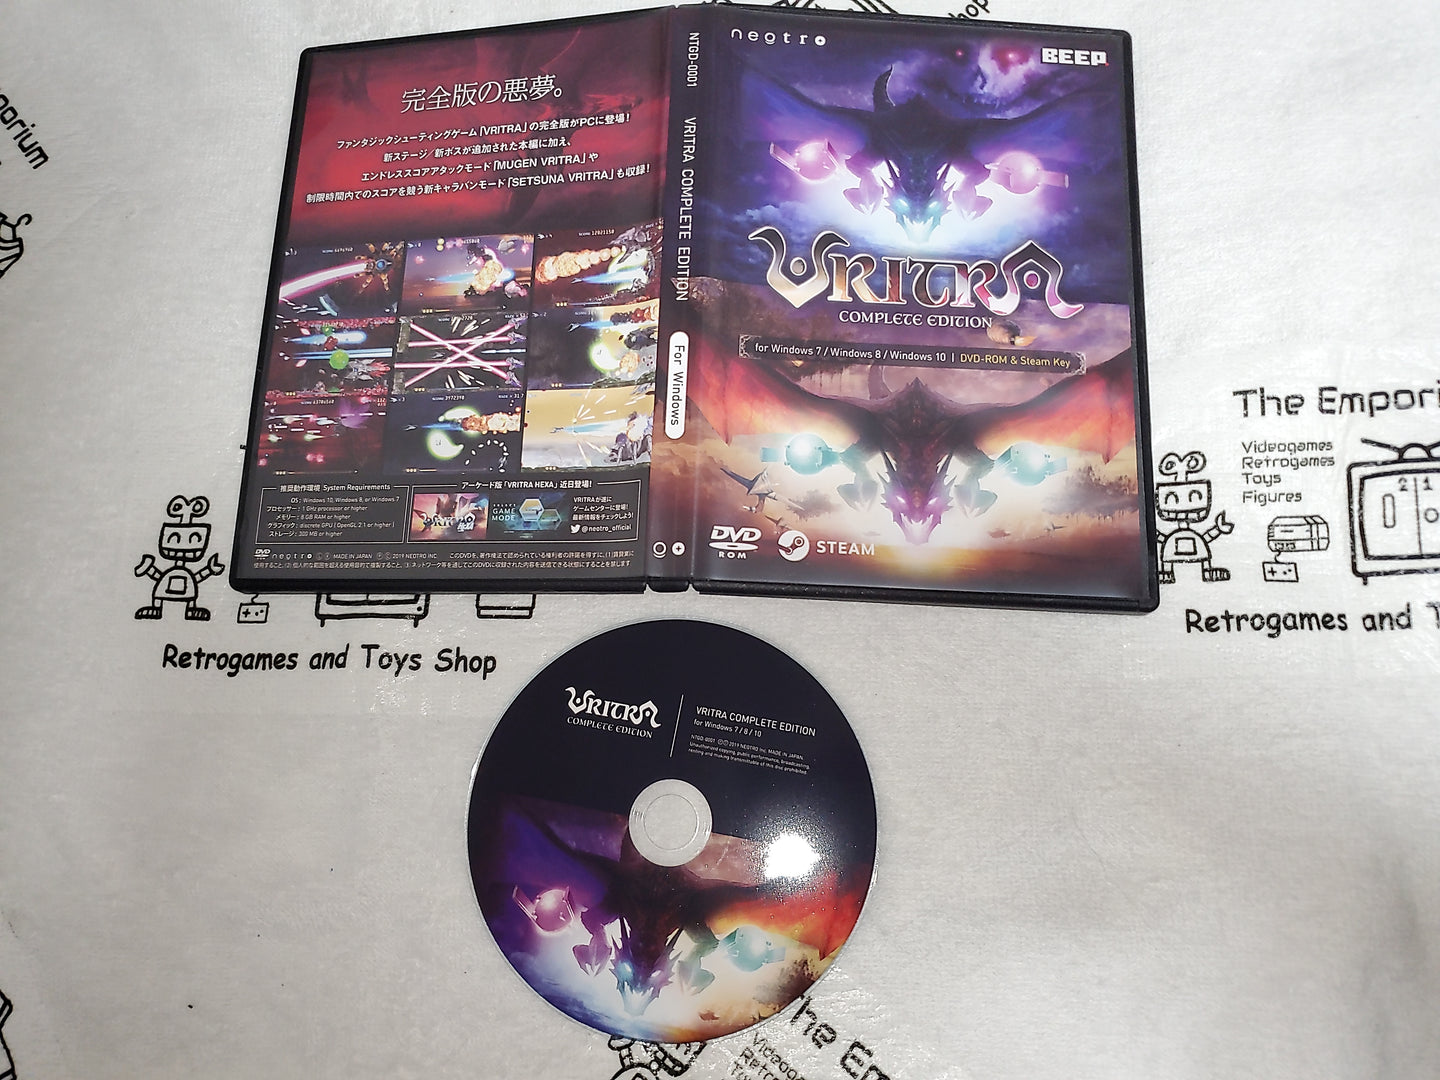 VRITRA: Complete Edition (PC)  software computer windows japan